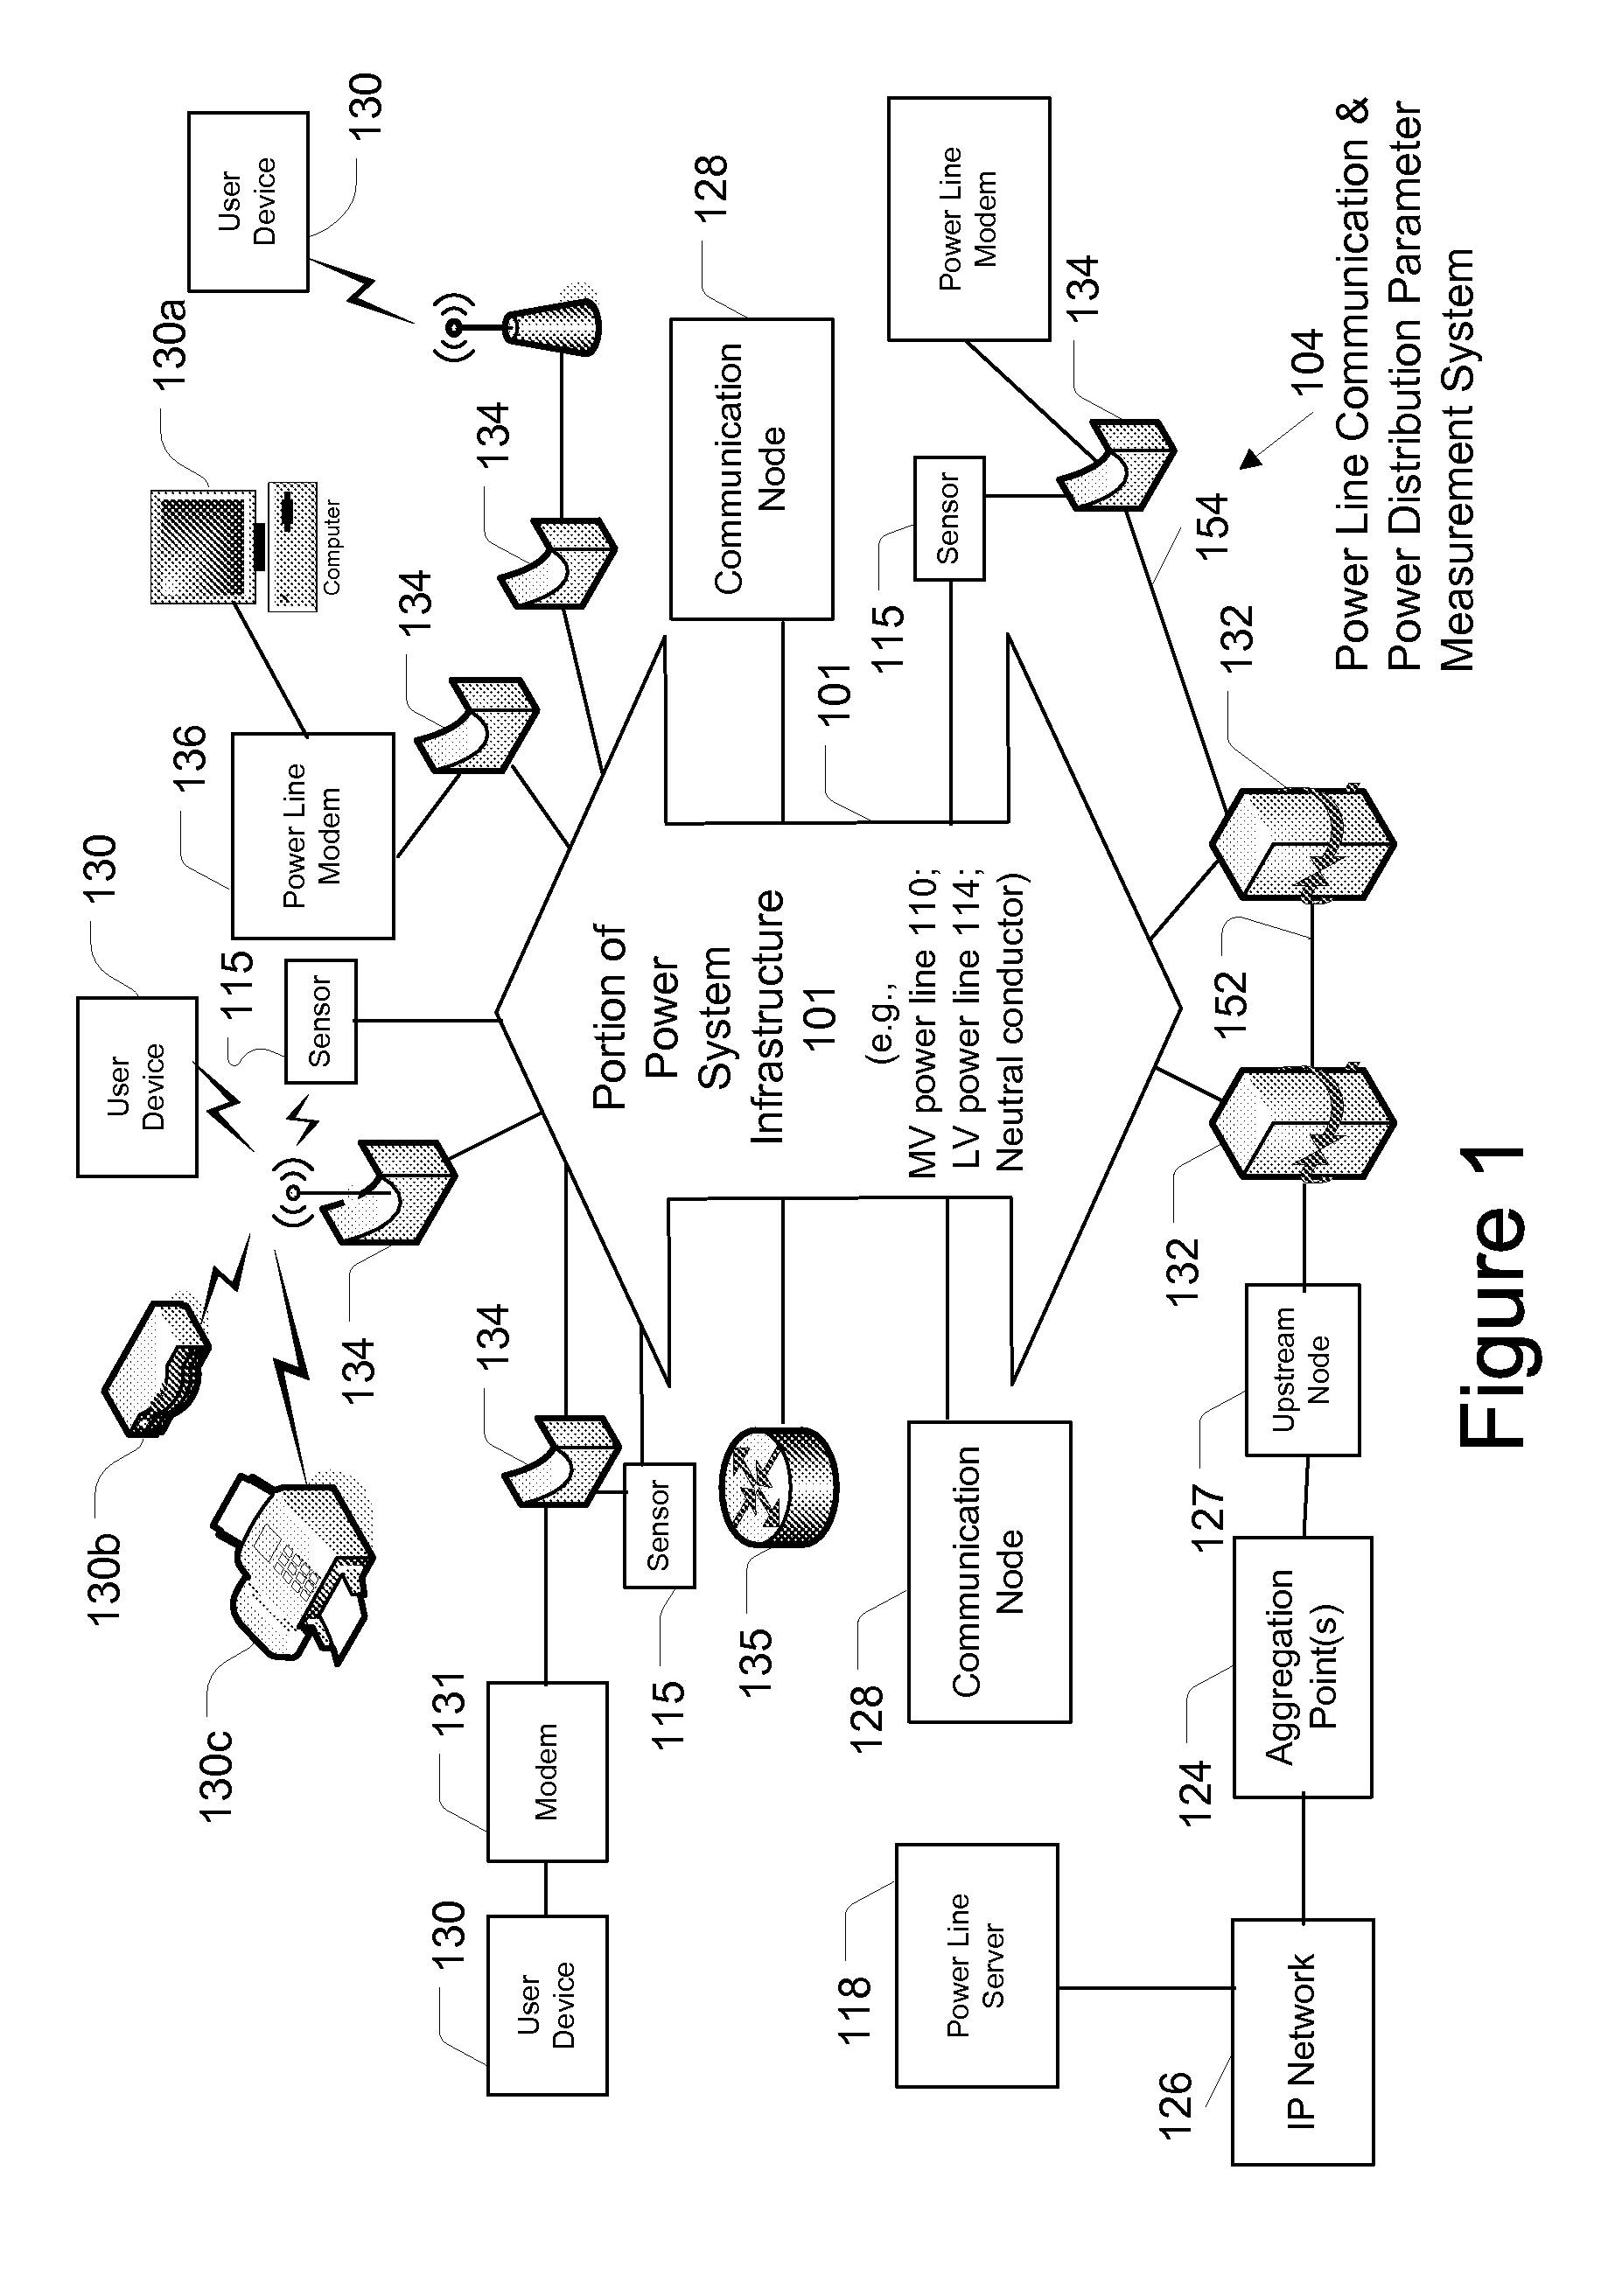 Power Line Communication and Power Distribution Parameter Measurement System and Method